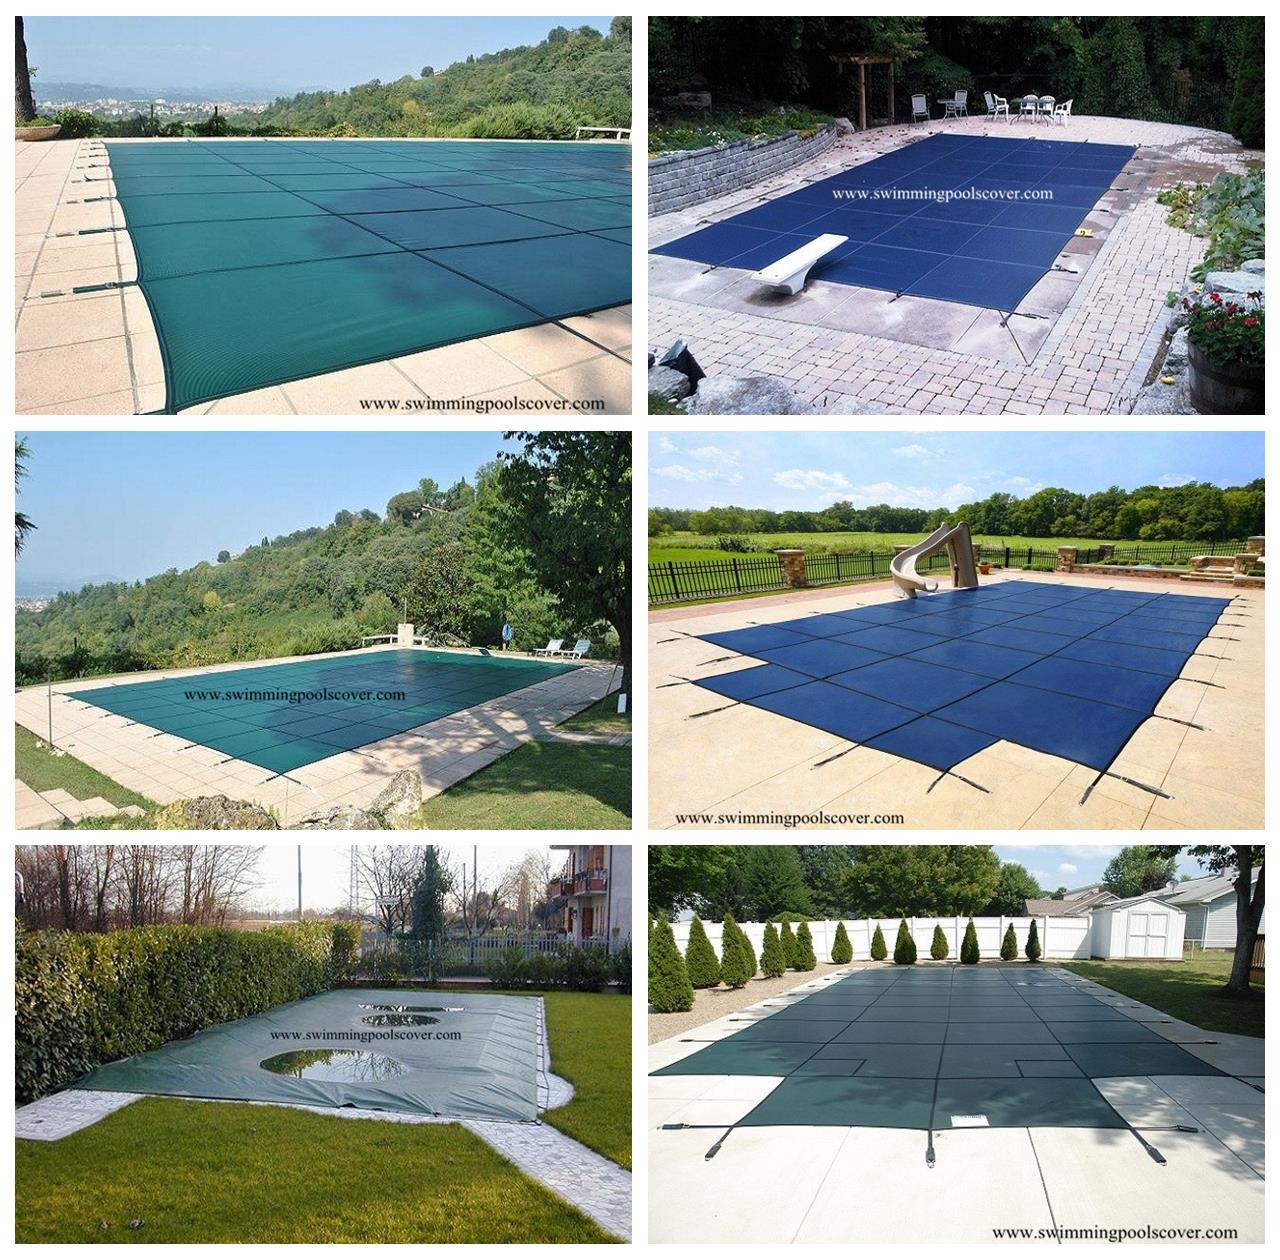 Mesh Swimming Pool Covers Outdoor for Oval Pool.jpg